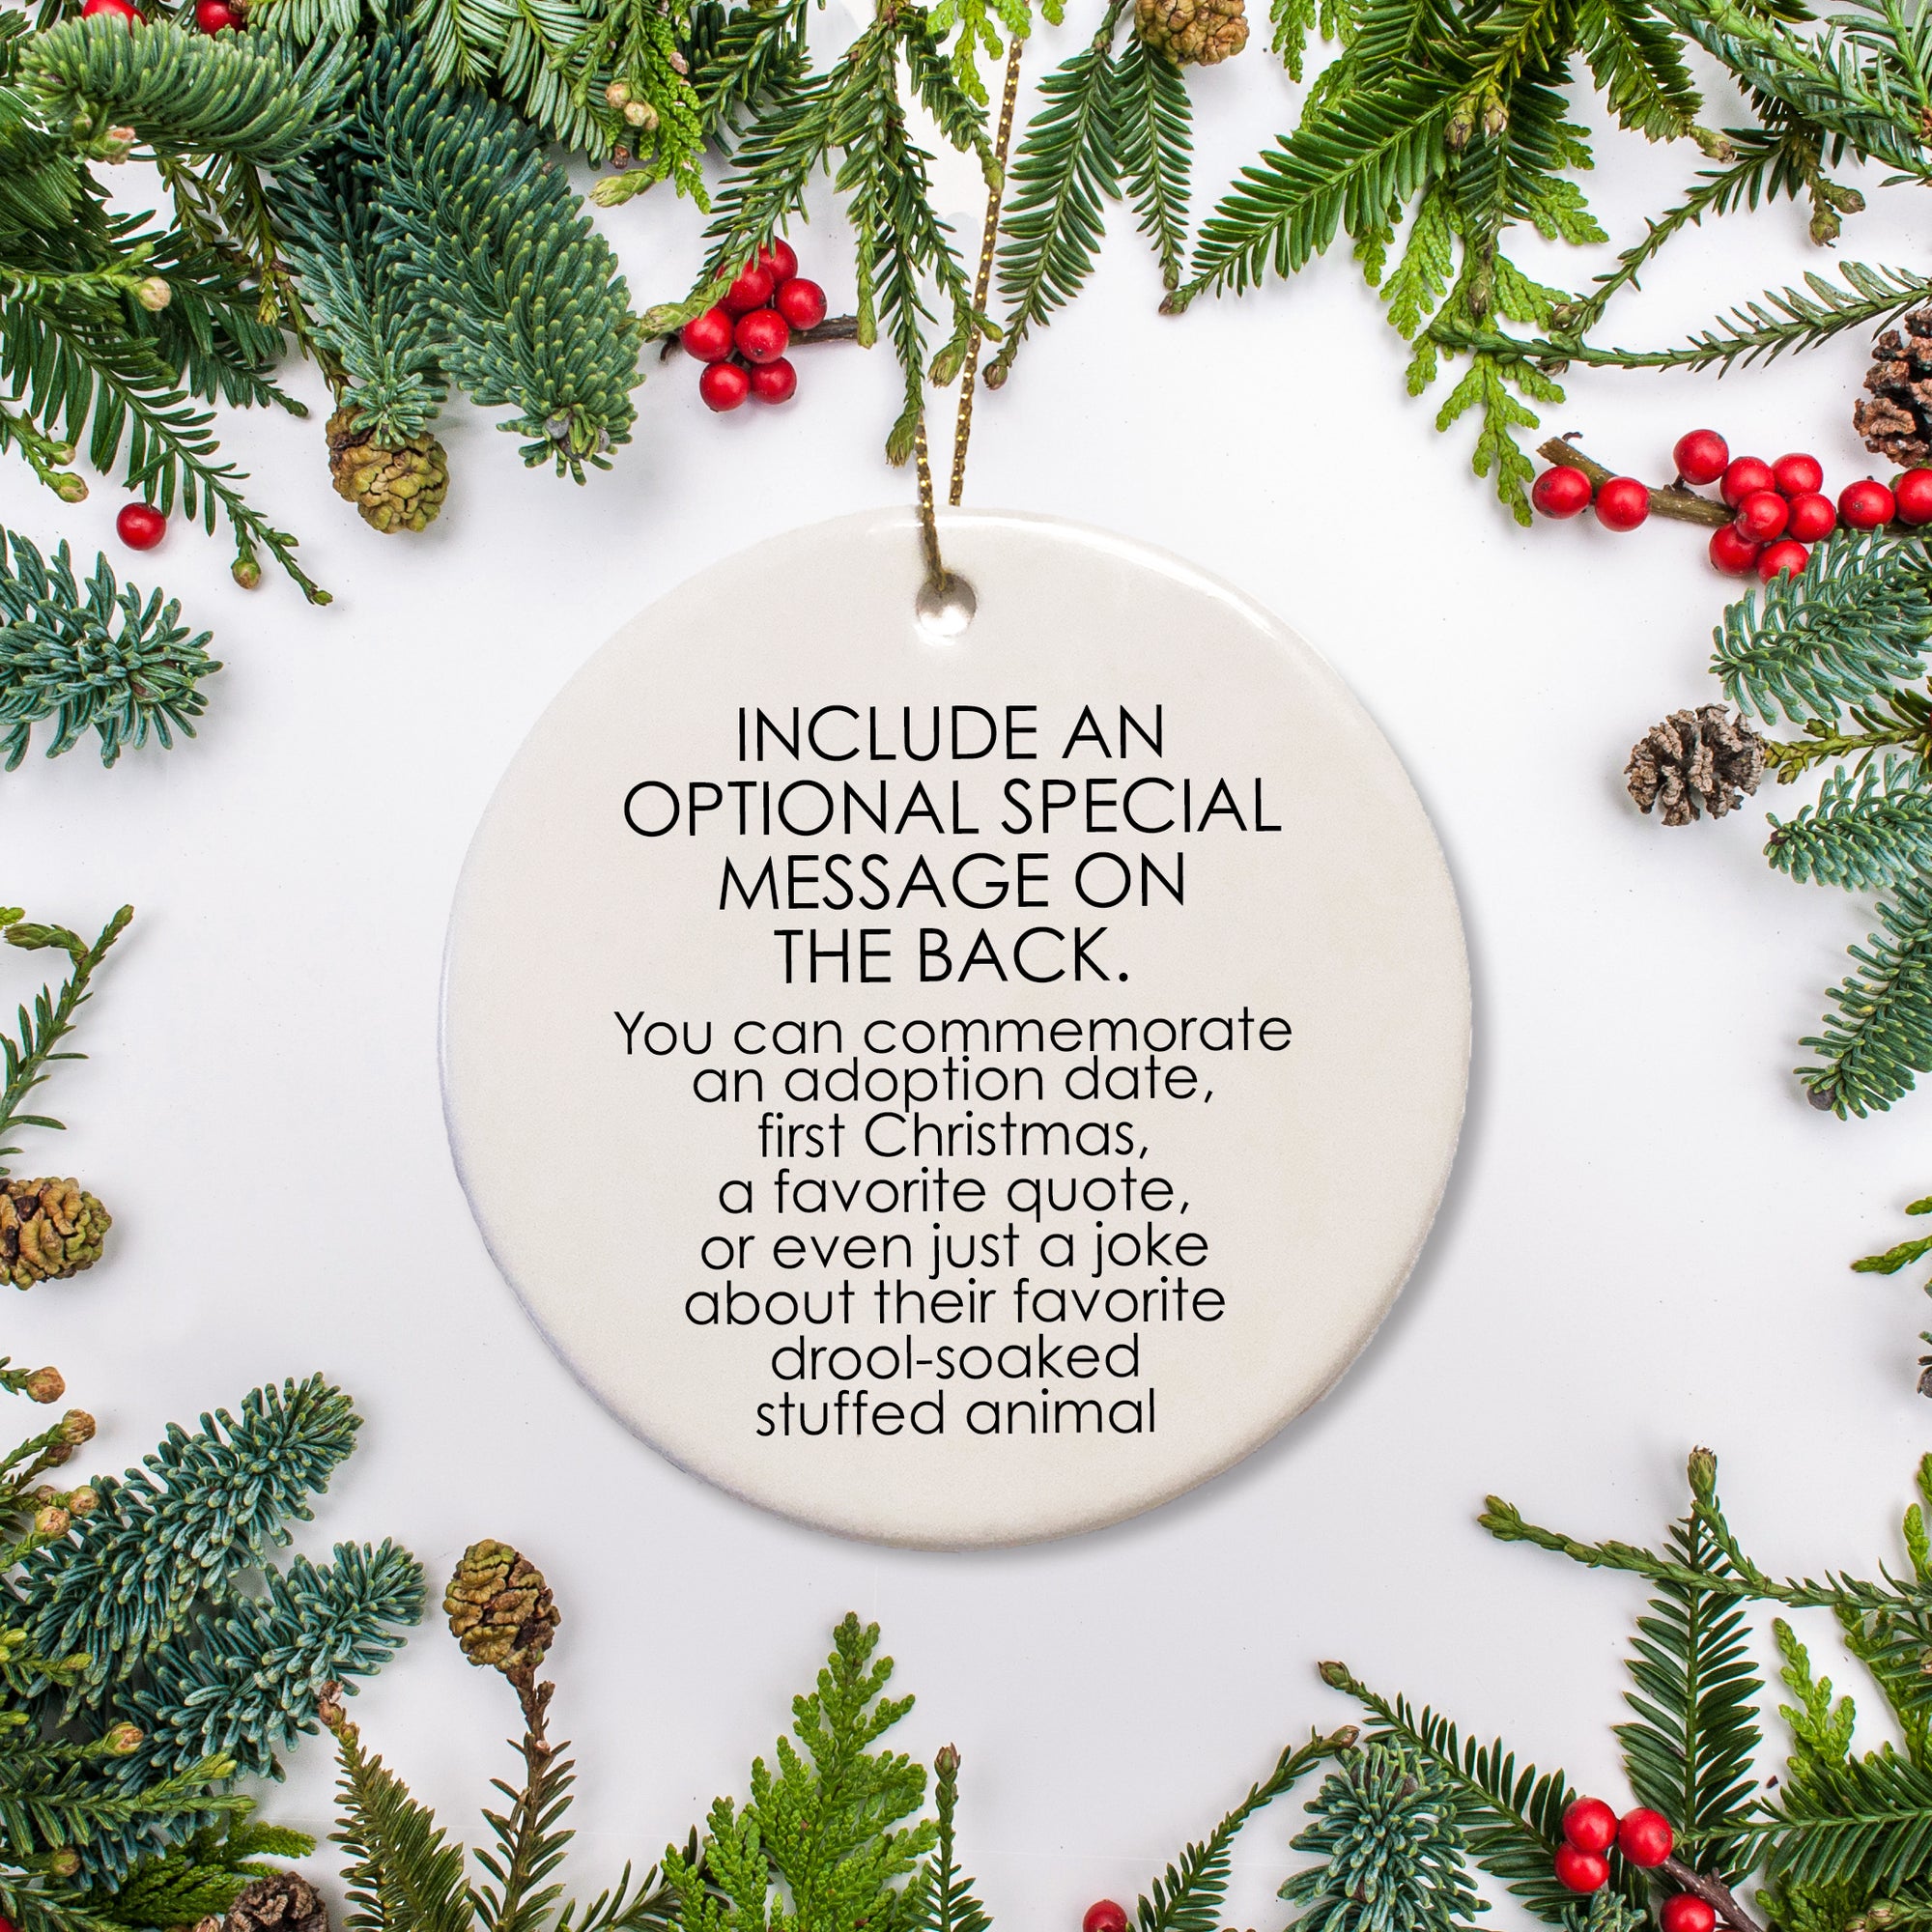 Include an optional special message on the back of the ornament